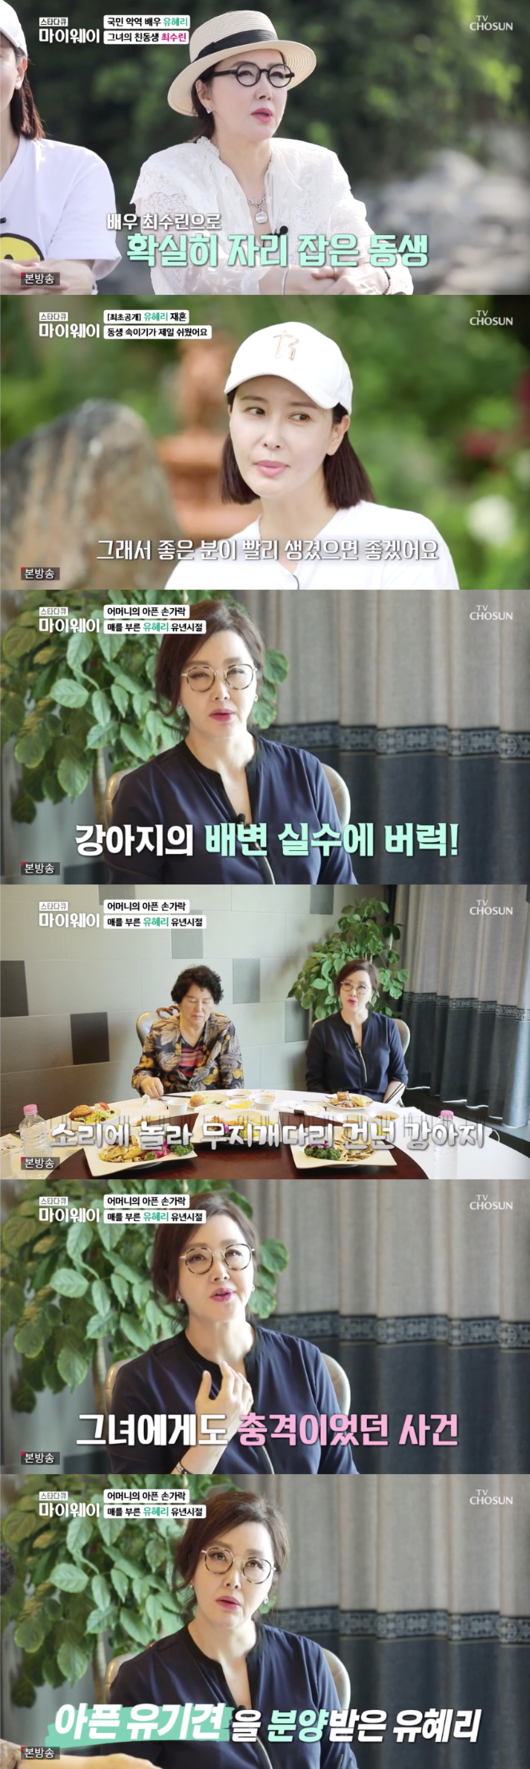 star documentary myway Yoo Hye-ri showed off his lonely life after the divorce.His own brother, Actor Su-rin Choi, also generously cheered.In the TV ship star documentary myway on the 15th, Yoo Hye-ri told his best friend Kim Cheong, I am 11 years old with my youngest sister.Im old enough to talk to you. I like having a sister, and I envy someone who has a daughter and I do that.The real names of Yoo Hye-ri and Su-rin Choi were Choi Soo-yeon and Choi Jung-il, respectively.My father was so opposed to Actor that I changed his name and used a pseudonym to deceive him, Yoo Hye-ri said frankly.Su-rin Choi said, I wanted to follow my sister as Yoo when I made a pseudonym as an actor.Although he grew up under his father, a strict and solemn investigative chief, Yoo Hye-ri was a daily horse light and succeeded as a Gearco Actor.Su-rin Choi, on the other hand, was a quiet, quiet brother.I was special to my brother. I carried it without my mother. When I went to school, my mother had a baby.She said she would give it to a small house if it were a son, but she was so relieved and happy that she was a daughter, and she was a lonely daughter and it was so good. Su-rin Choi said, My sister has been a main character since the beginning, she has a good appearance, and she has been good.At first, it started as if it were going well, but the gap was long for years. I spent my 30s in my 30s, wanting to be forgotten.My sister, who is comforting and empowering, he replied.Yoo Hye-ri met his best friend Hong Yeo-Jin and talked about the diverce: I regret living alone when I was sick from vascular disease.I dont want to give it to you, but Im comfortable with it, and I dont have to be in the way of anyone.The marriage life of Yoo Hye-ri was short for a year and a half, he said, My father was too concerned to wake up, so my little father took my hand on the marriage day.He said he was drinking at home. Why didnt I listen to them? It was hasty. Divorce.I thought you were against it.I was having a hard time with Divorce and another man. When I had cancer, he wanted to break up. Thank you so much.I thought I should have a man in old age to be comfortable, but since then I felt a sense of liberation, and I wanted to stand instead of leaning on a man. Yoo Hye-ri, who grew up after the divorce, said, I do not think Divorce is a stain or scratch for me.Im old enough to know what I shouldnt do with Choices. Im mature.Now he is raising puppy and cats alone. Yoo Hye-ri said, I raised the puppy that someone gave me.It was a shock. So I went to the dog shelter and brought in a sick dog. I live well.I am going to raise puppy and cats for the rest of my life. star documentary myway